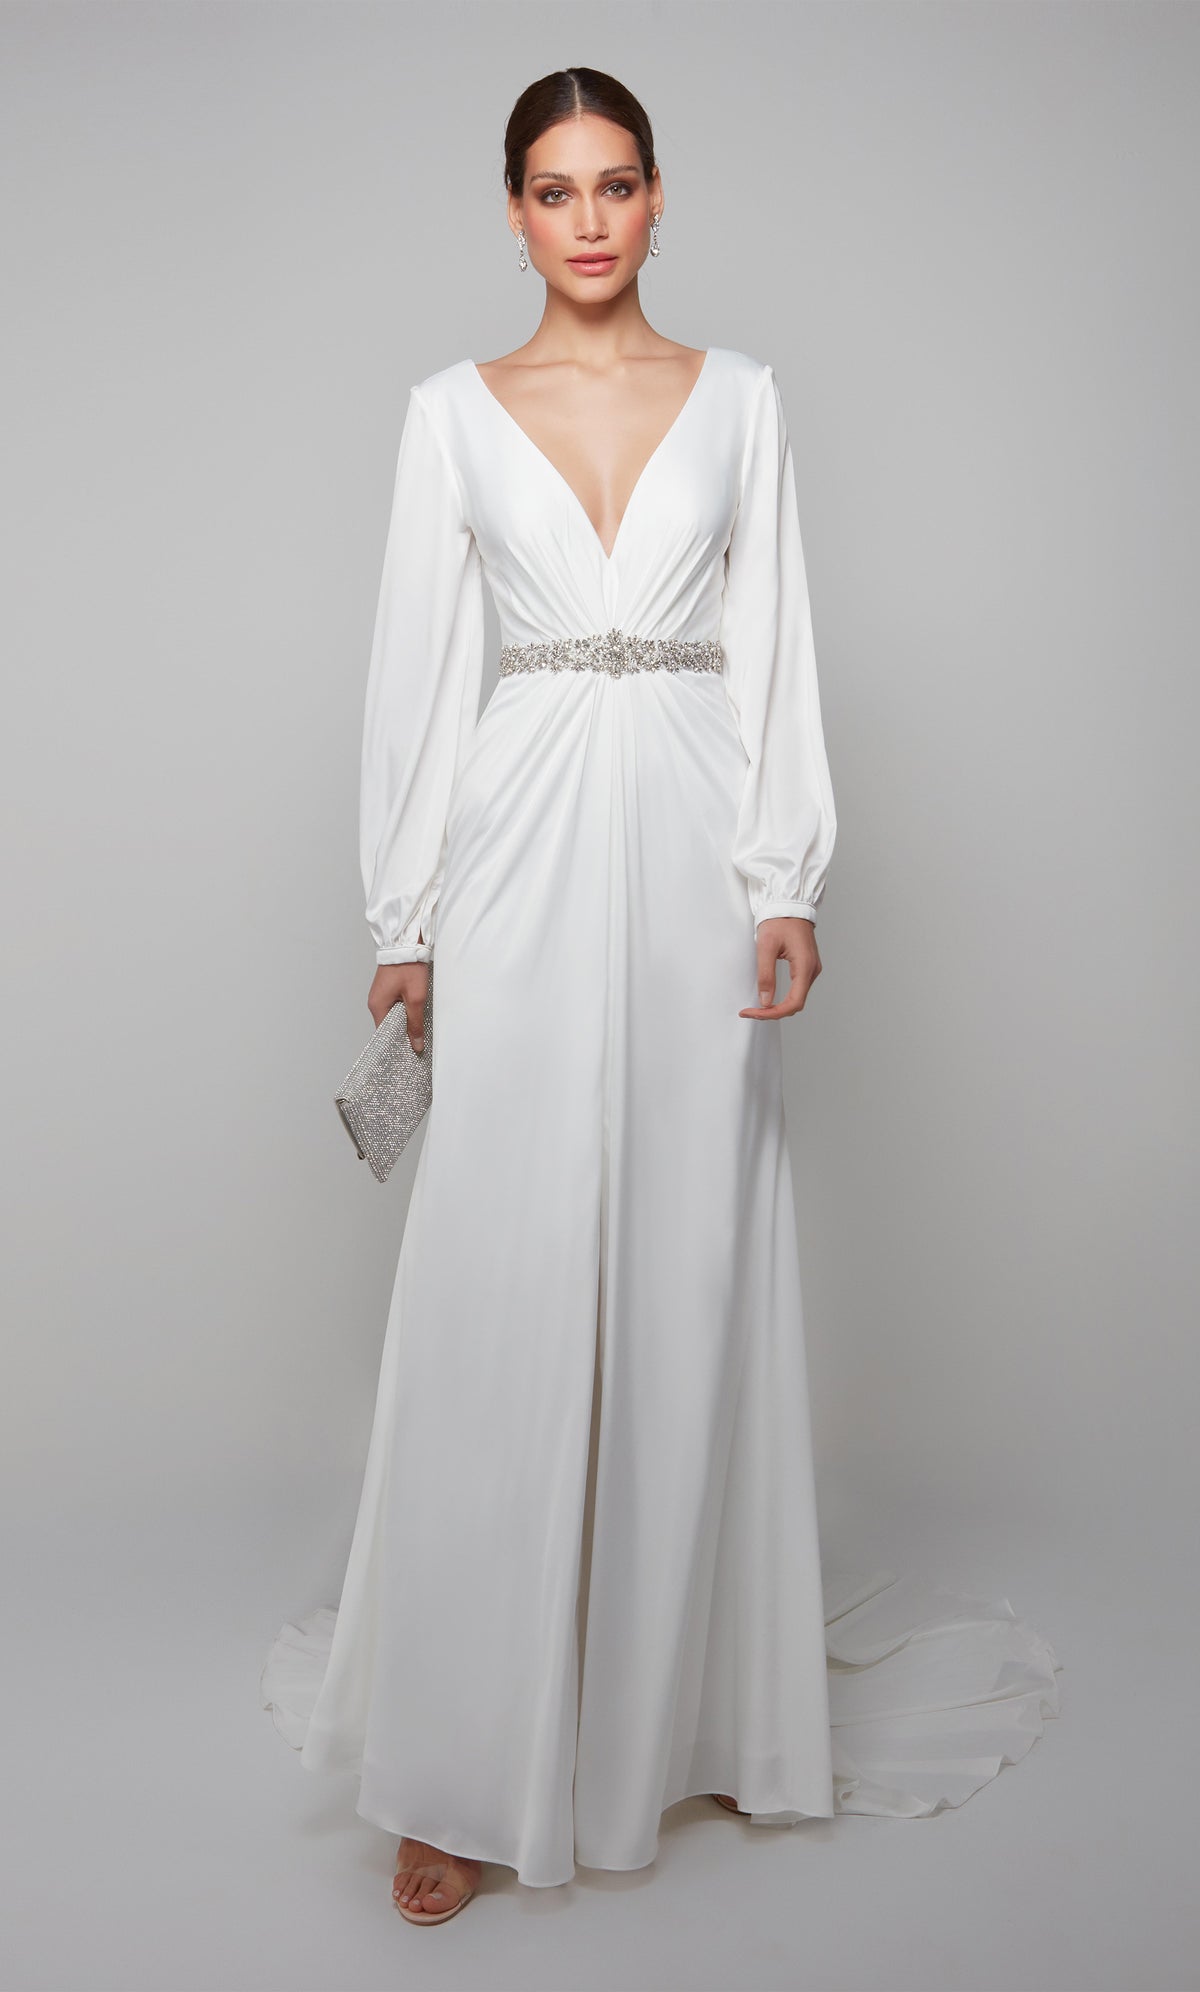 Long sleeve draped wedding dress with a plunging neckline, faux belt, and front slit in white.